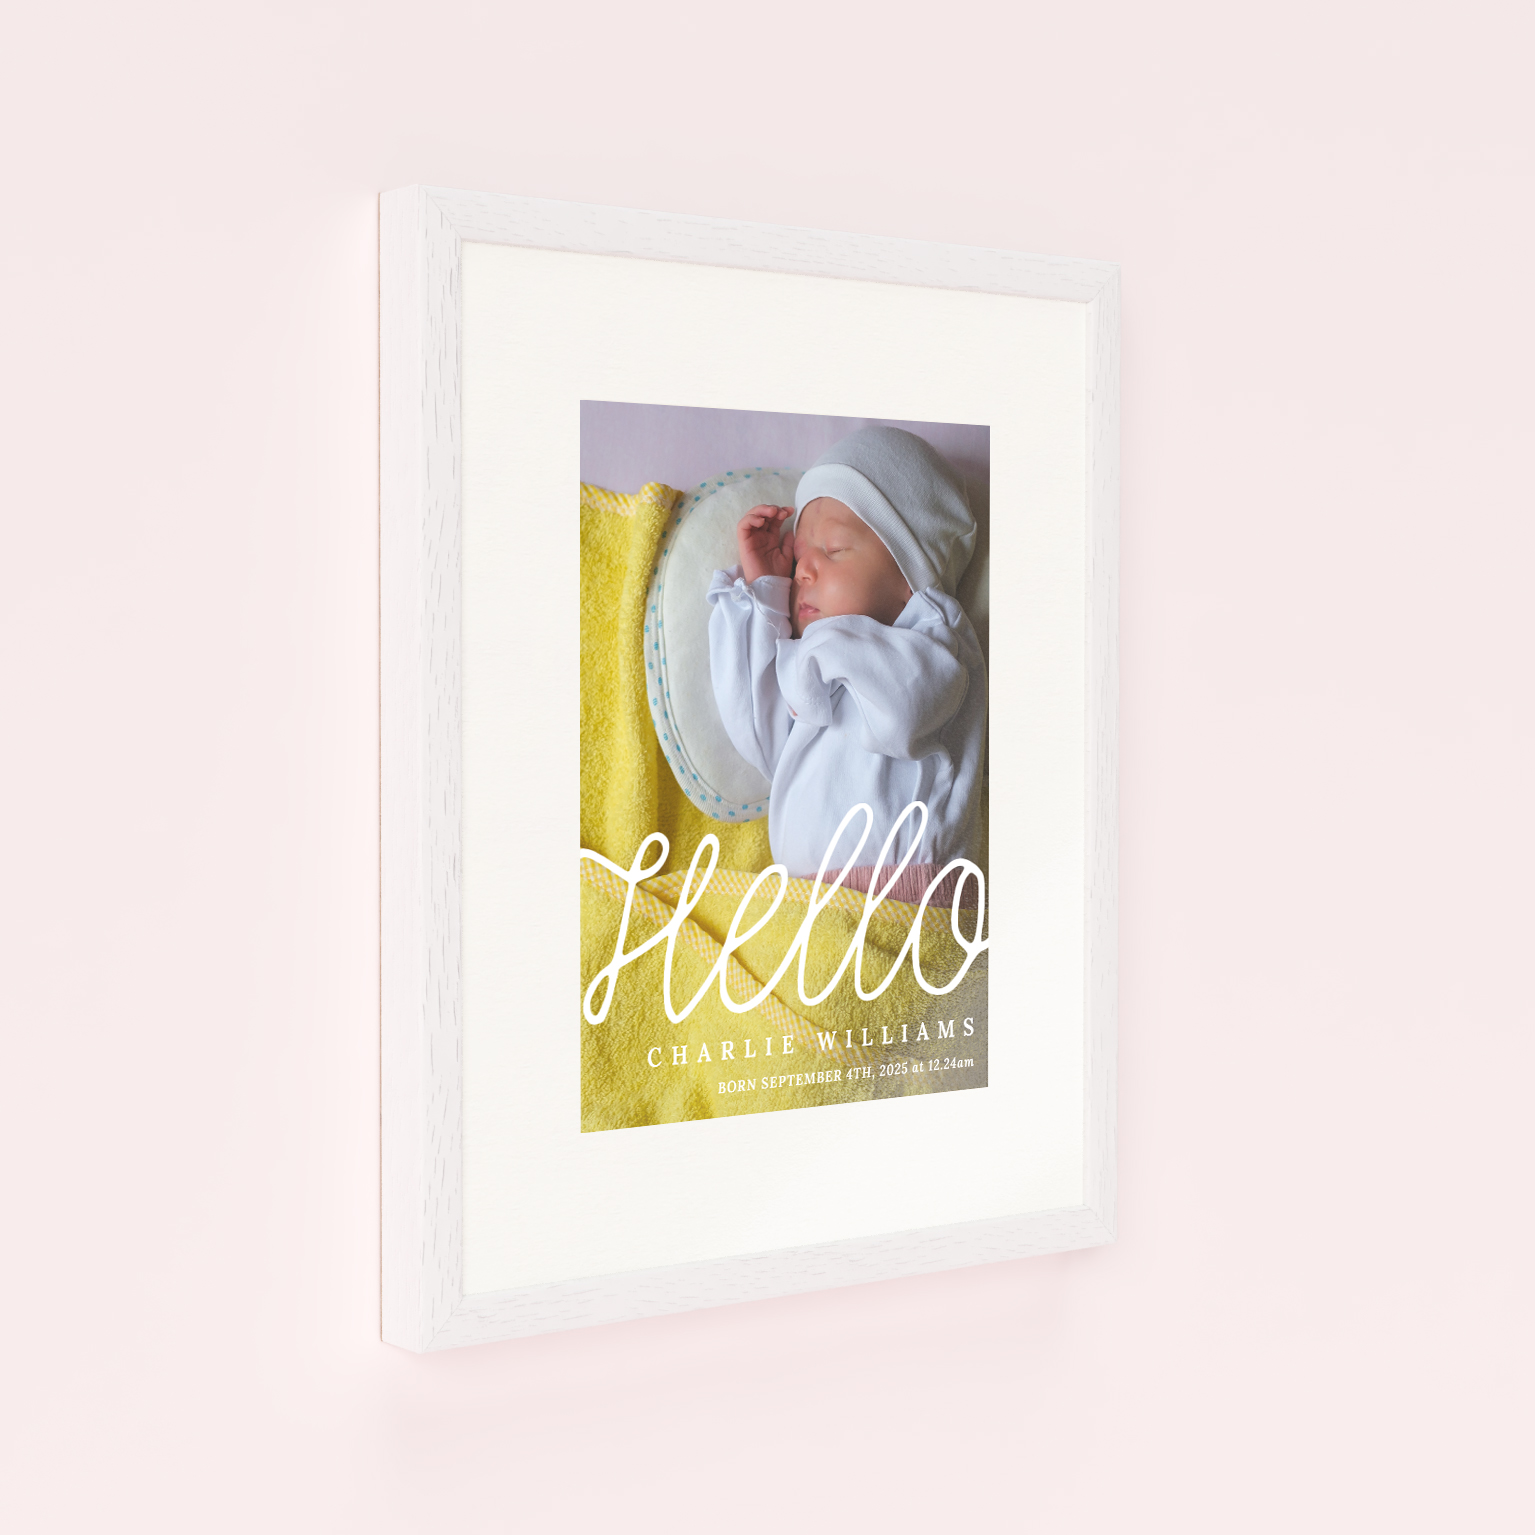 Photo of a framed photo print called 'Hello from me'. It is 40cm x 30cm in size, in a Portrait orientation. It has space for 1 photos.